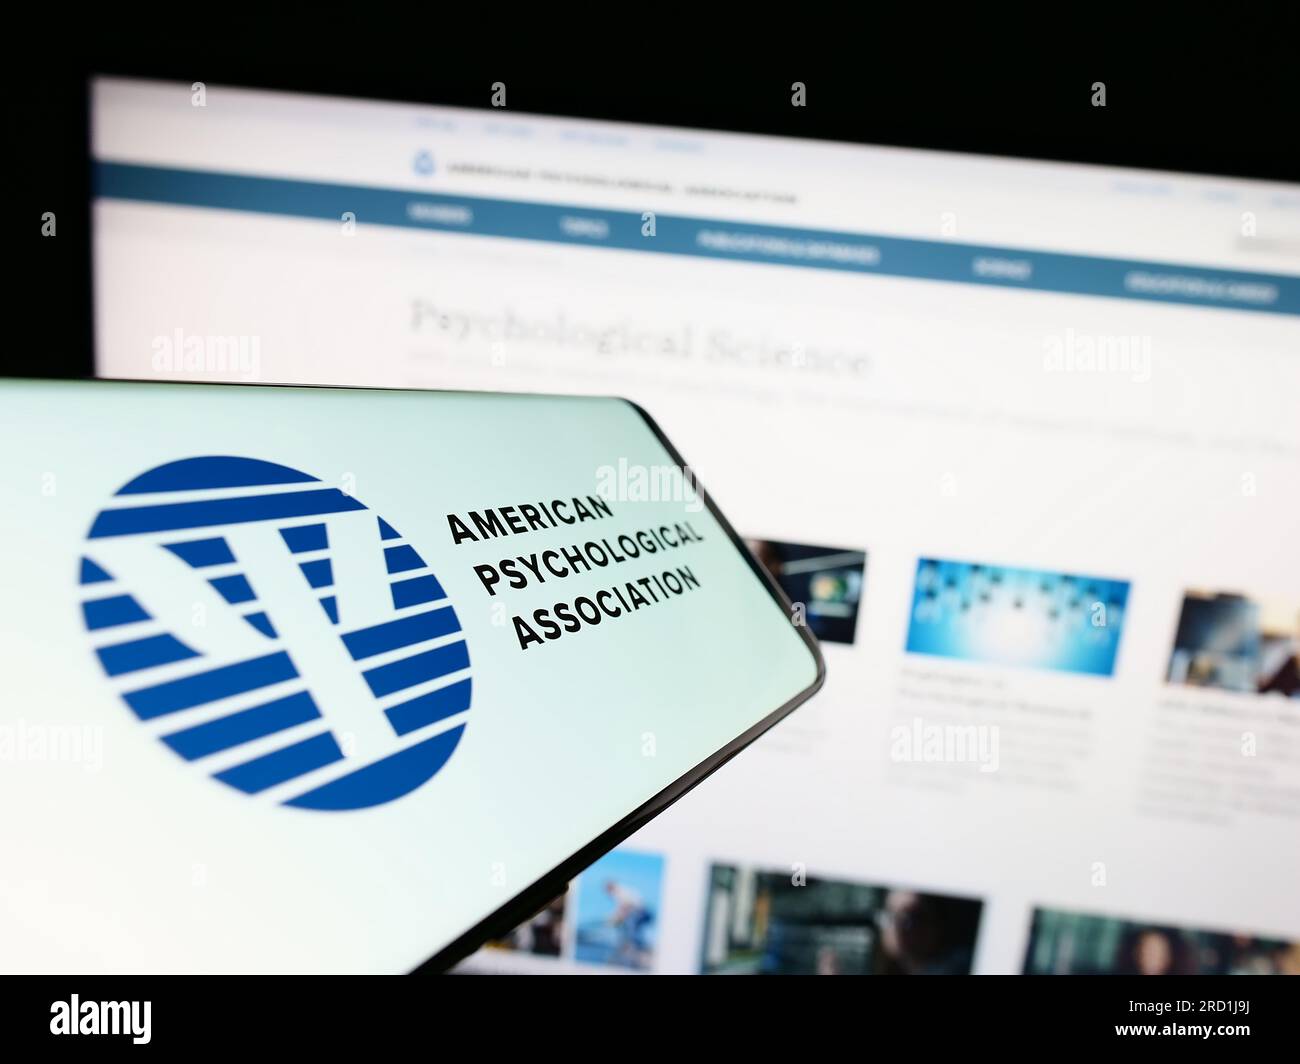 Smartphone with logo of American Psychological Association (APA) on screen in front of website. Focus on center of phone display. Stock Photo